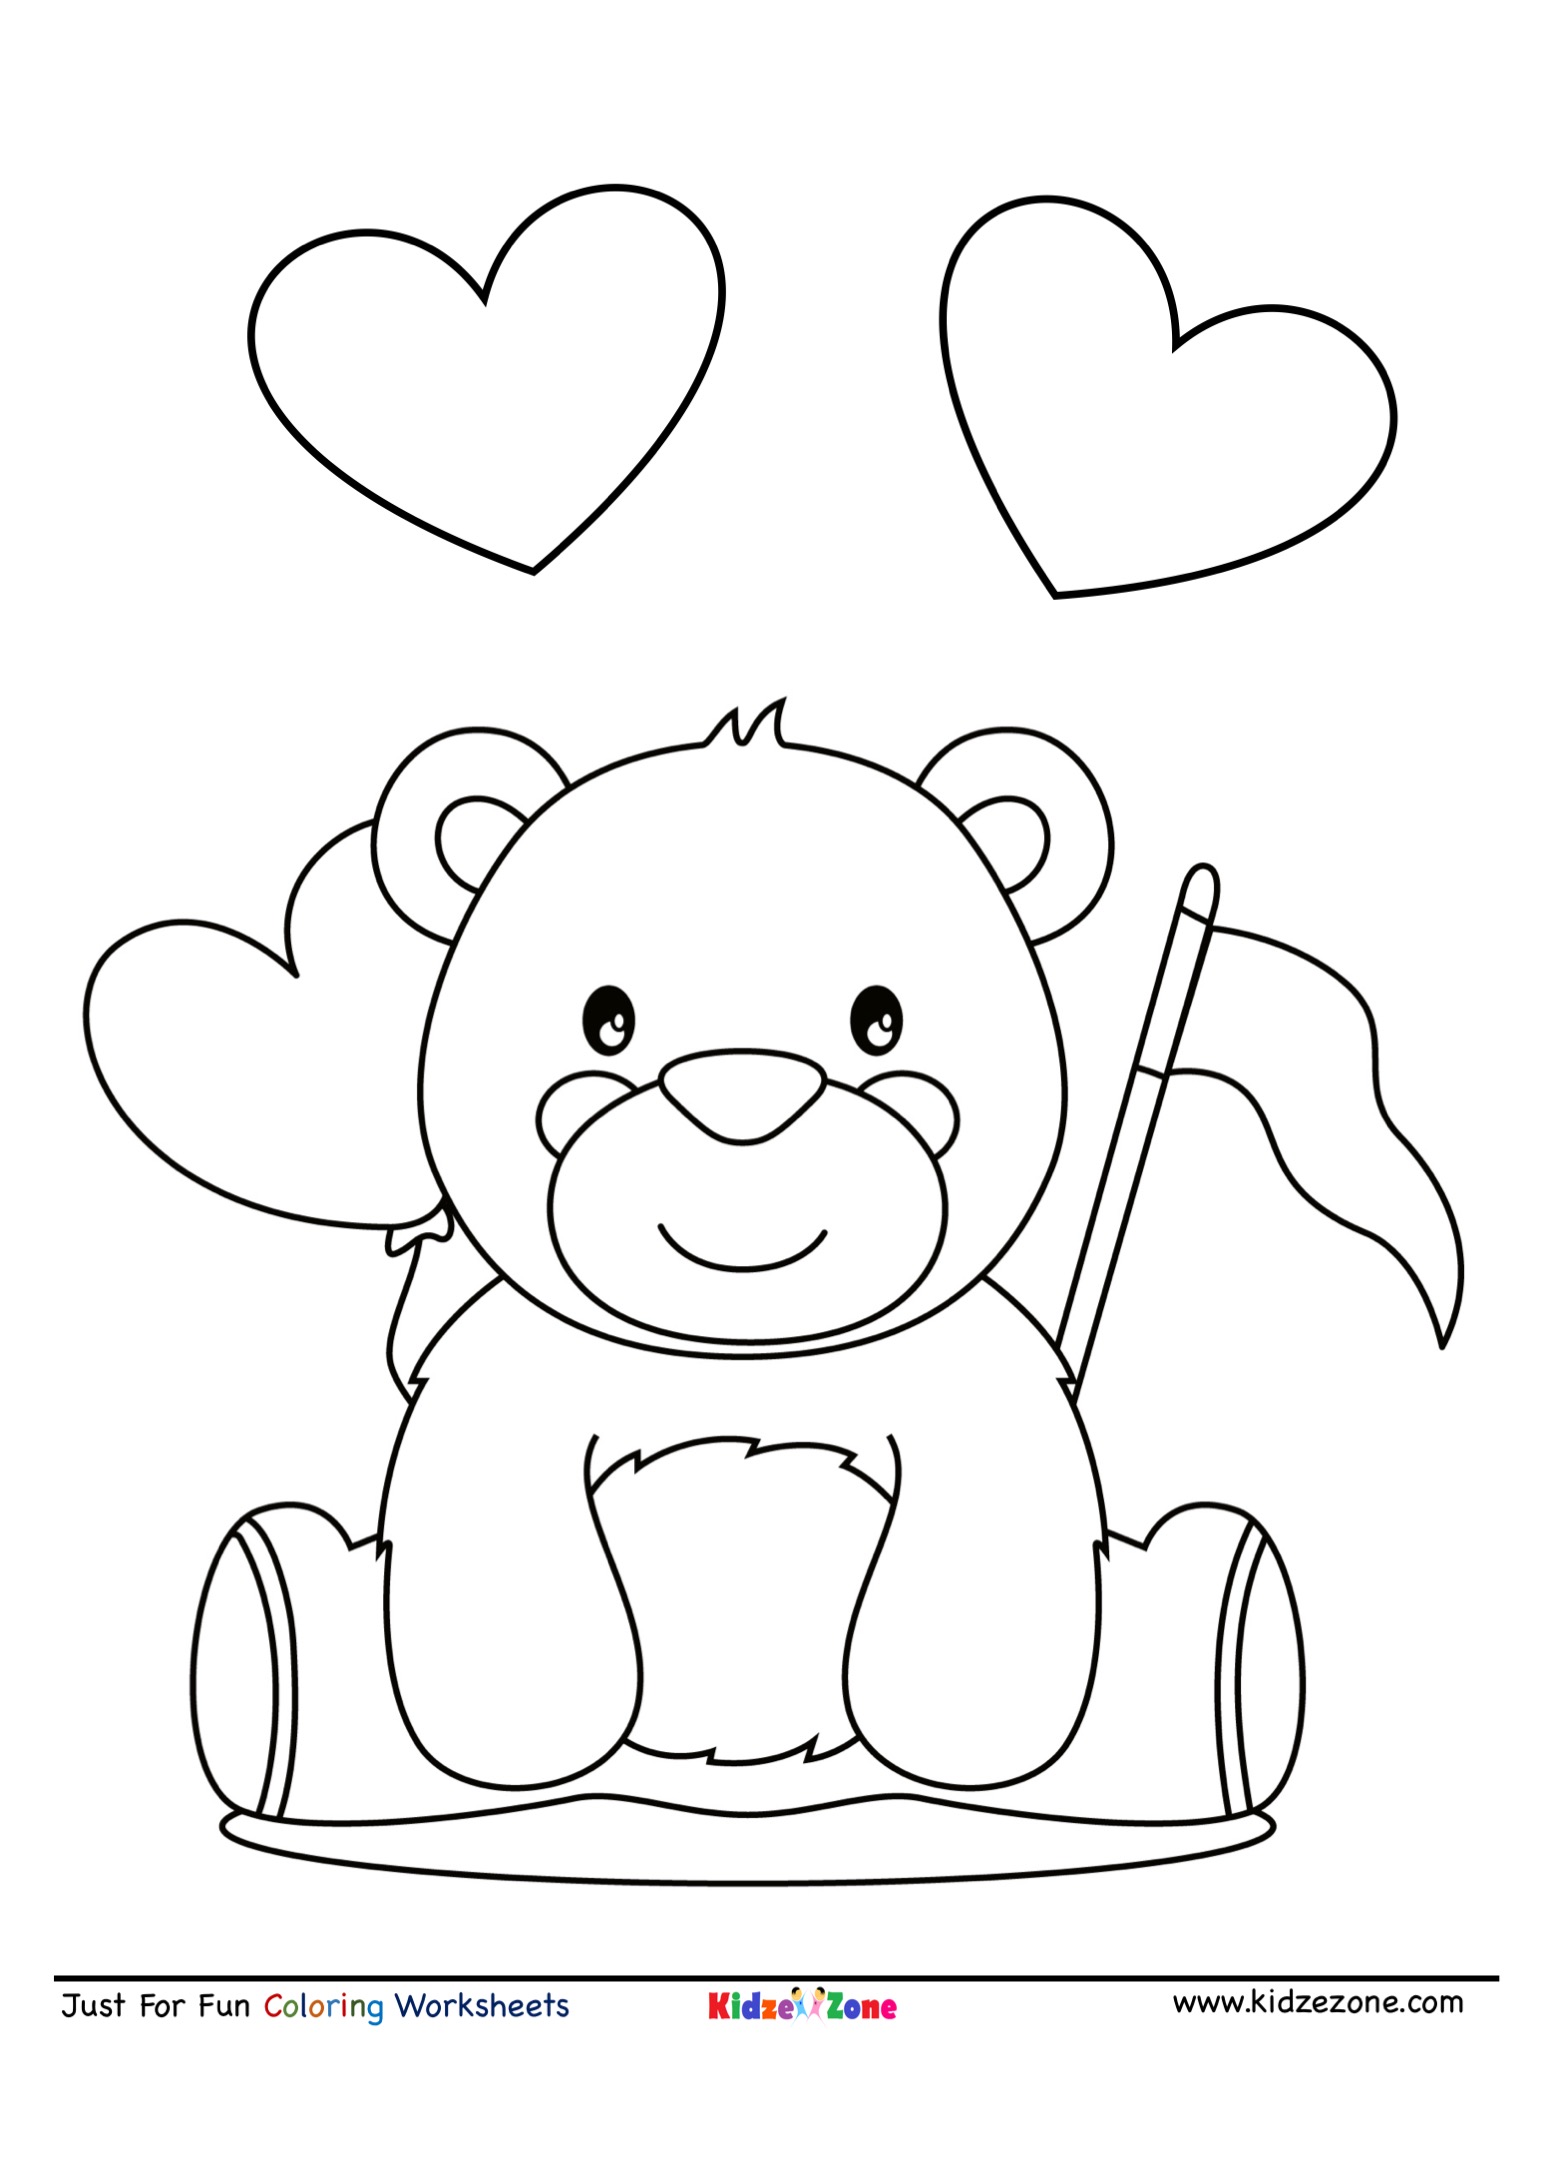 Cute Teddy Bear Coloring Page - KidzeZone